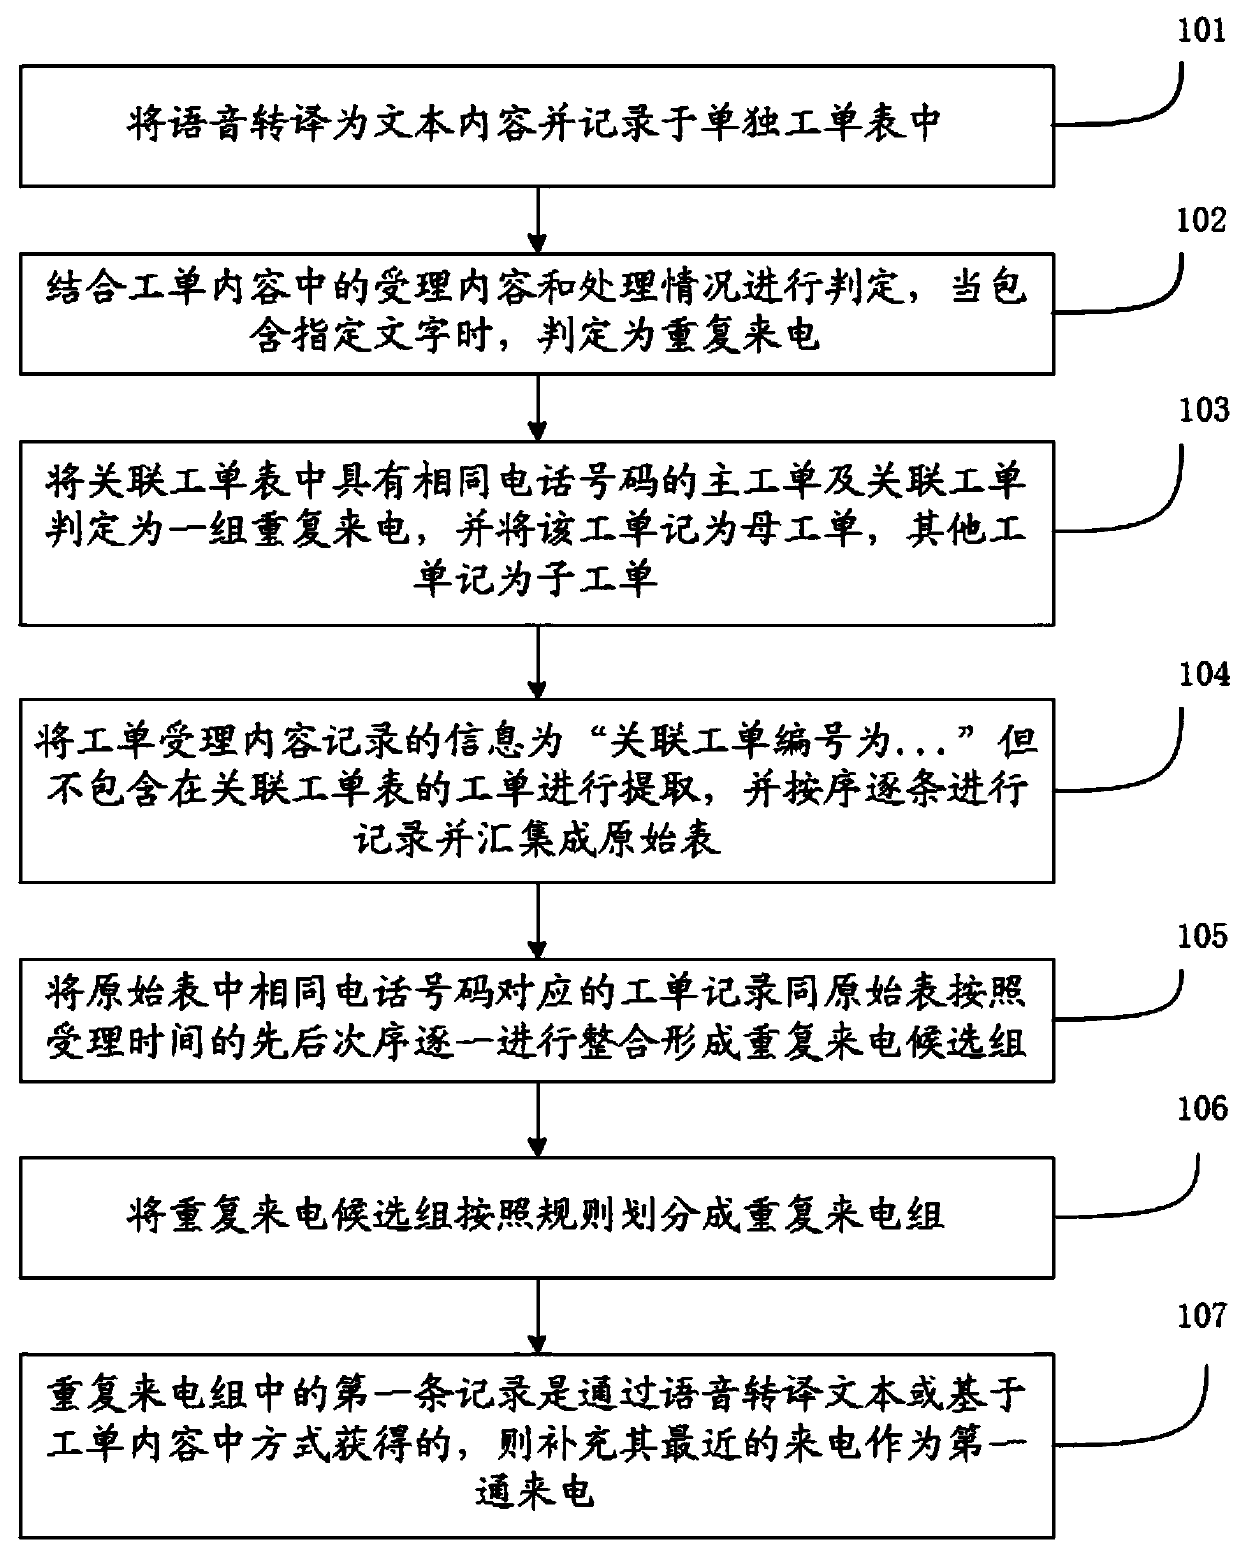 Model construction method for repeated incoming call analysis and recognition